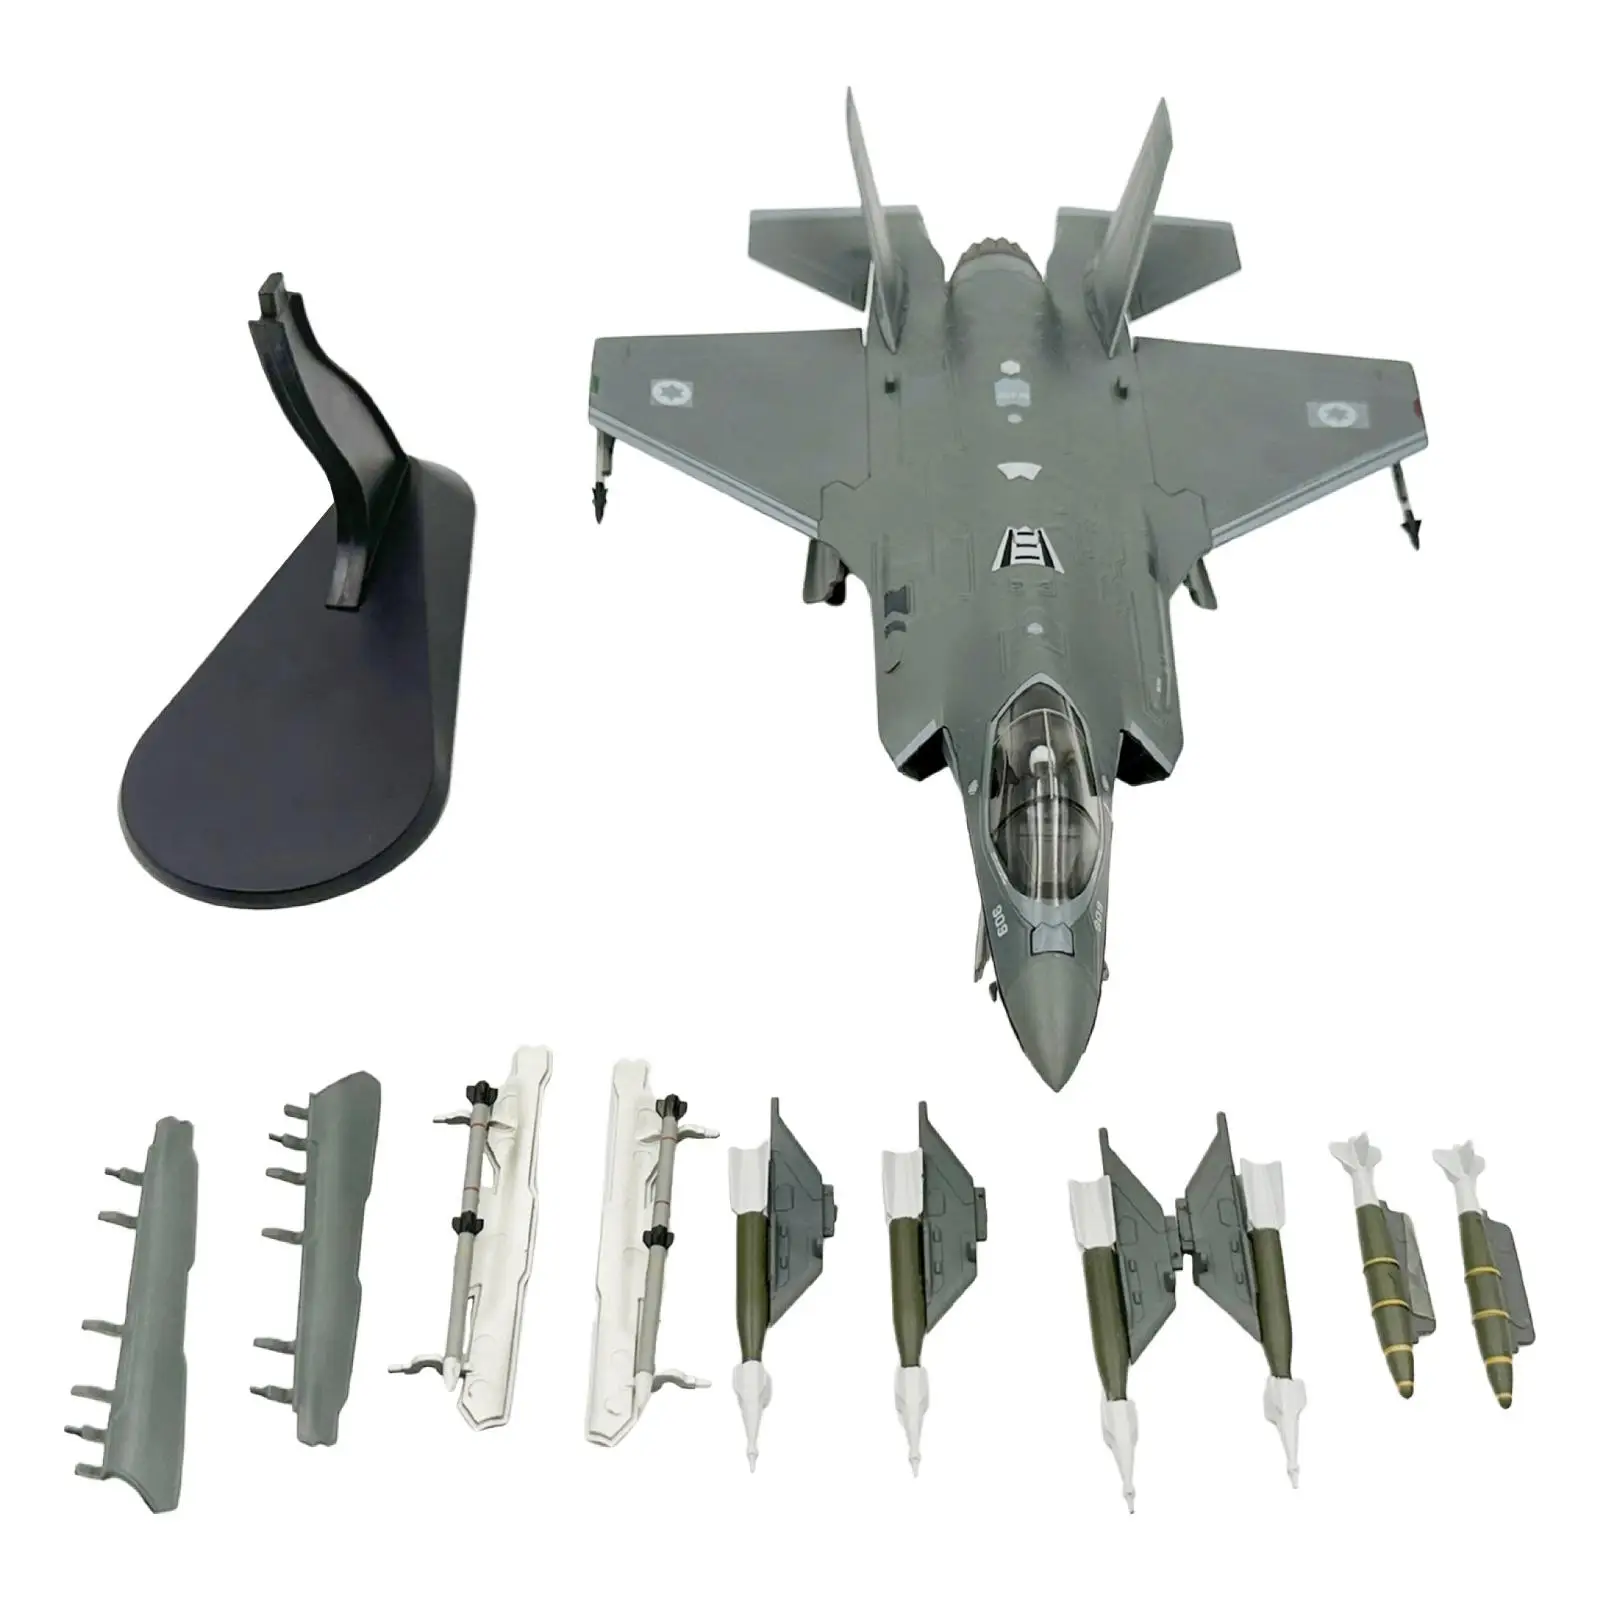 

1:72 F-35i Display Tabletop Decor Souvenir with Display Base Diecast Plane Model Model Airplane for Birthday Gifts Collectables